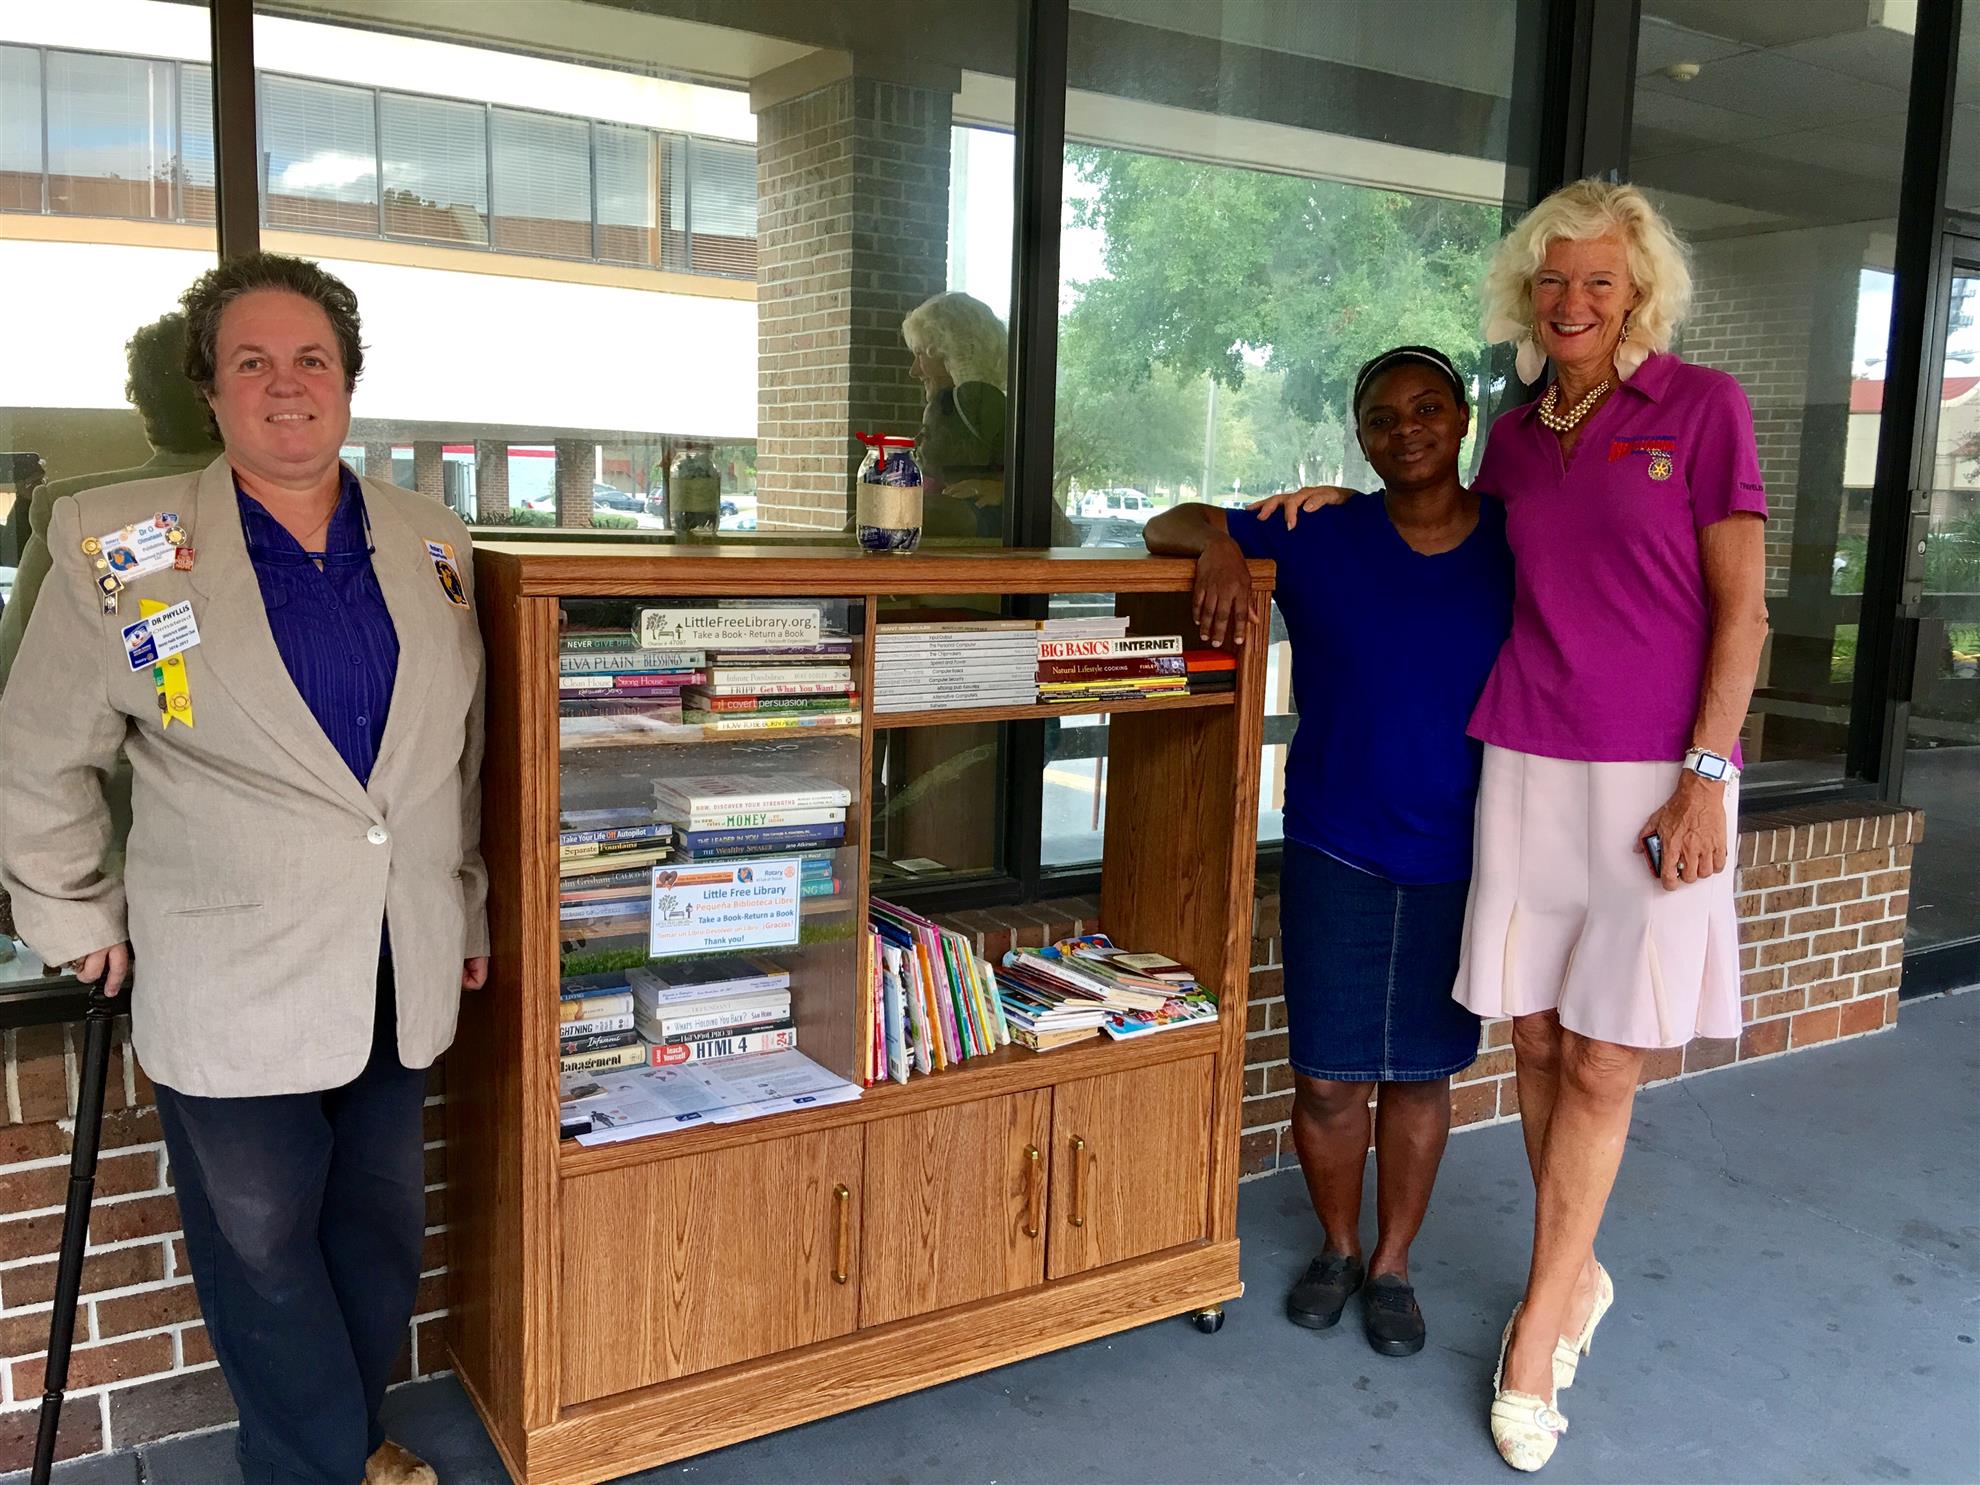 DrO, Shannon, and Theodora finally assemble Little Free Library.